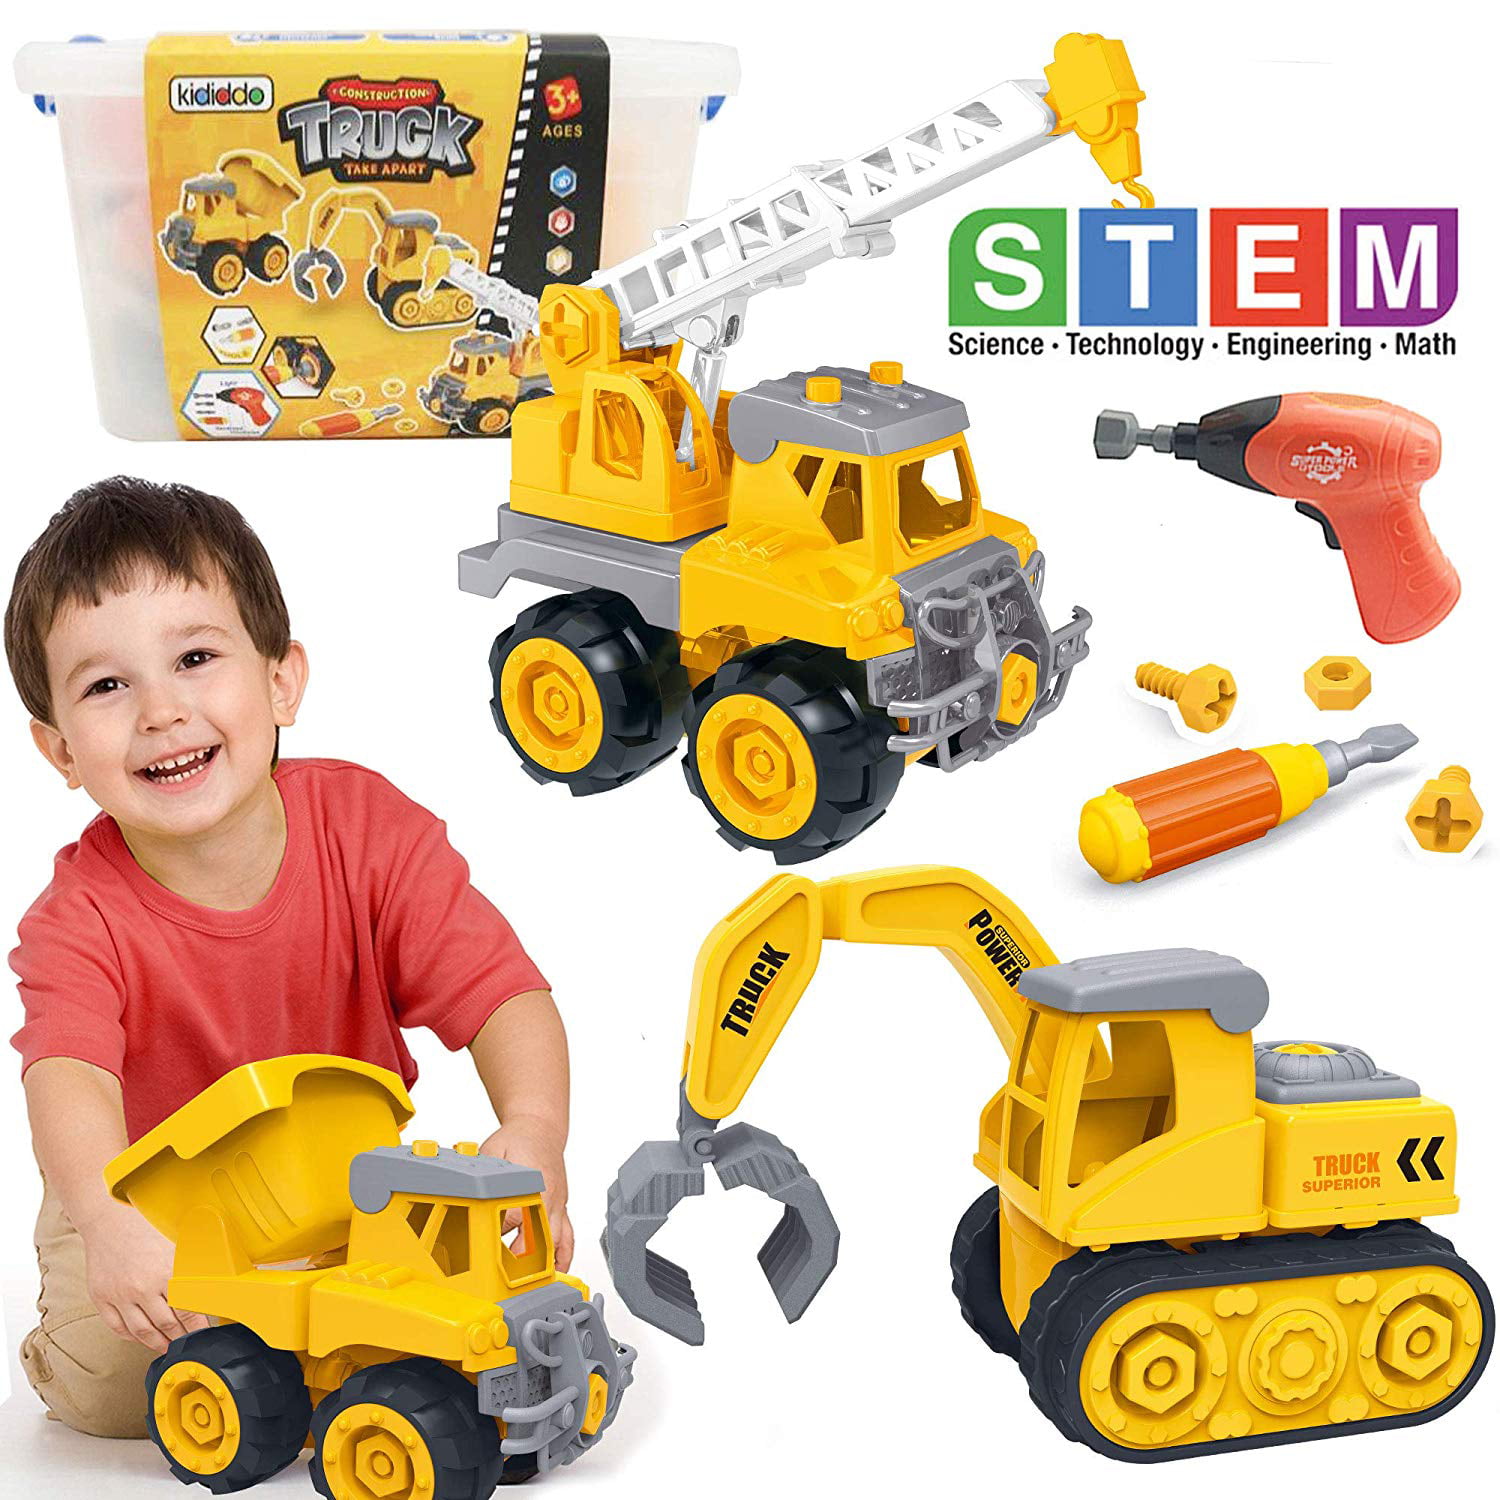 Kids Construction DIY Toy Truck Car Dinosaur Self Assembly Set Tools Included 